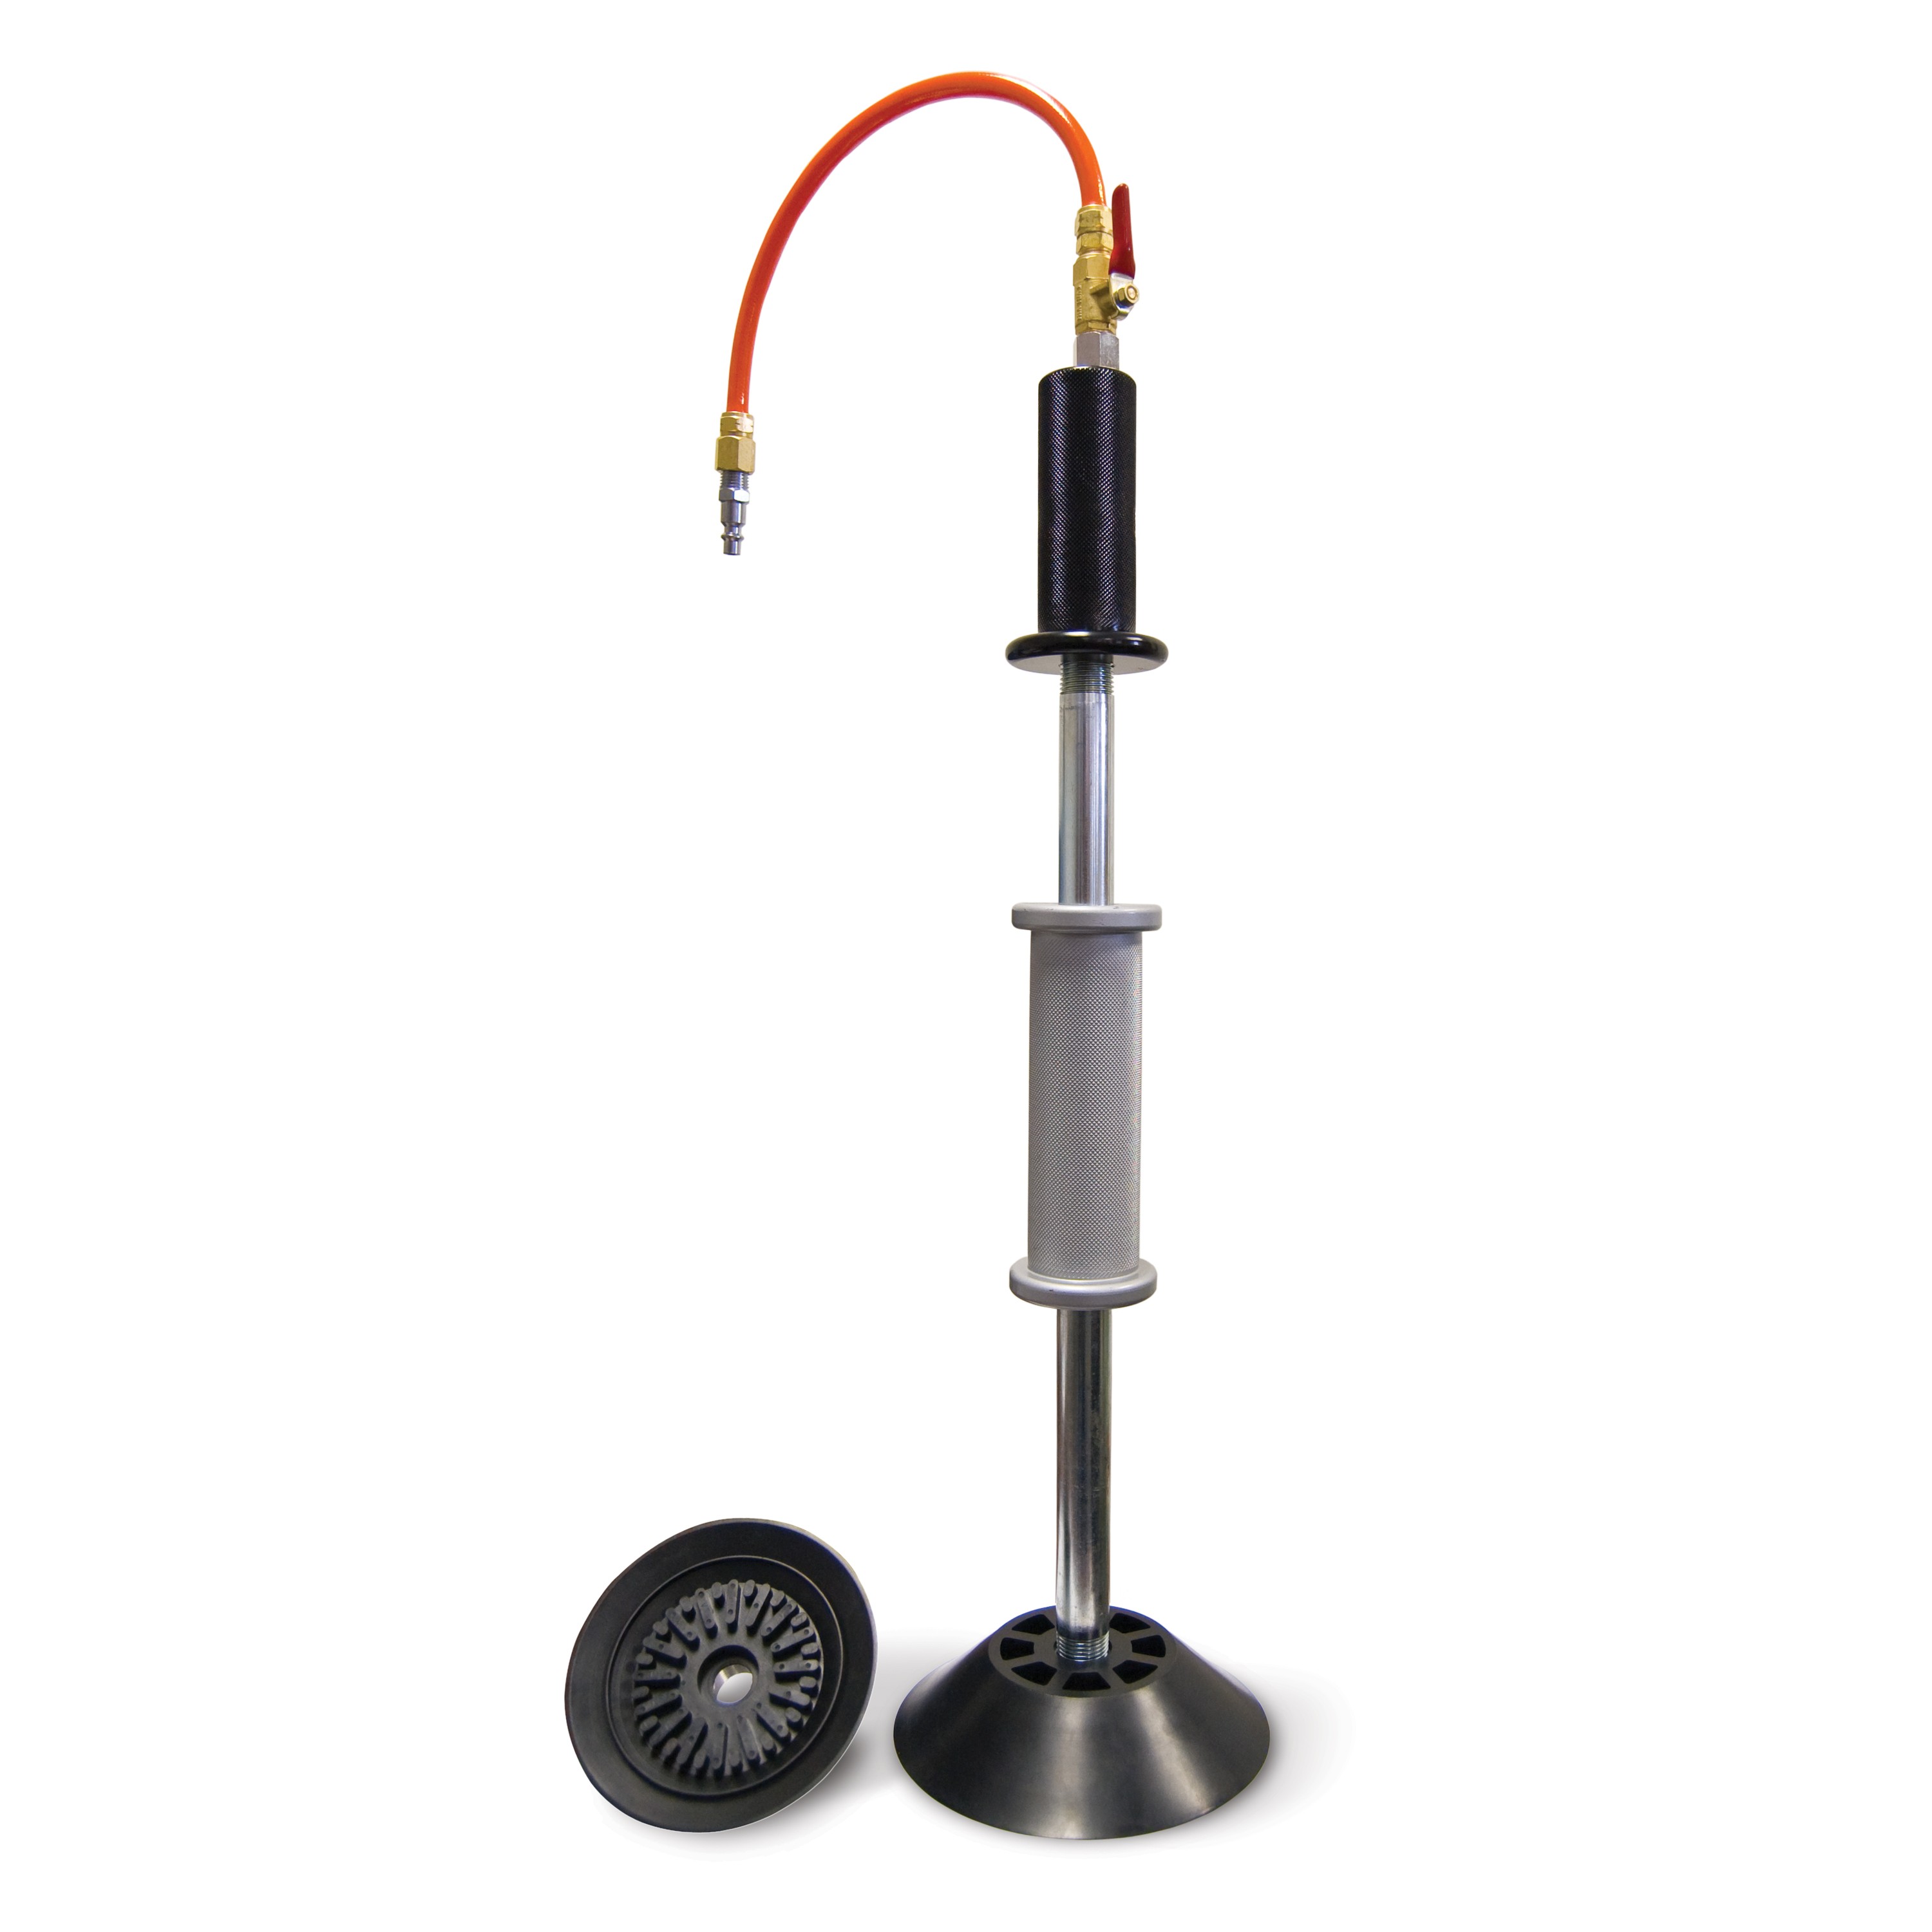 Pneumatic Dent Puller Suction Cup Kit